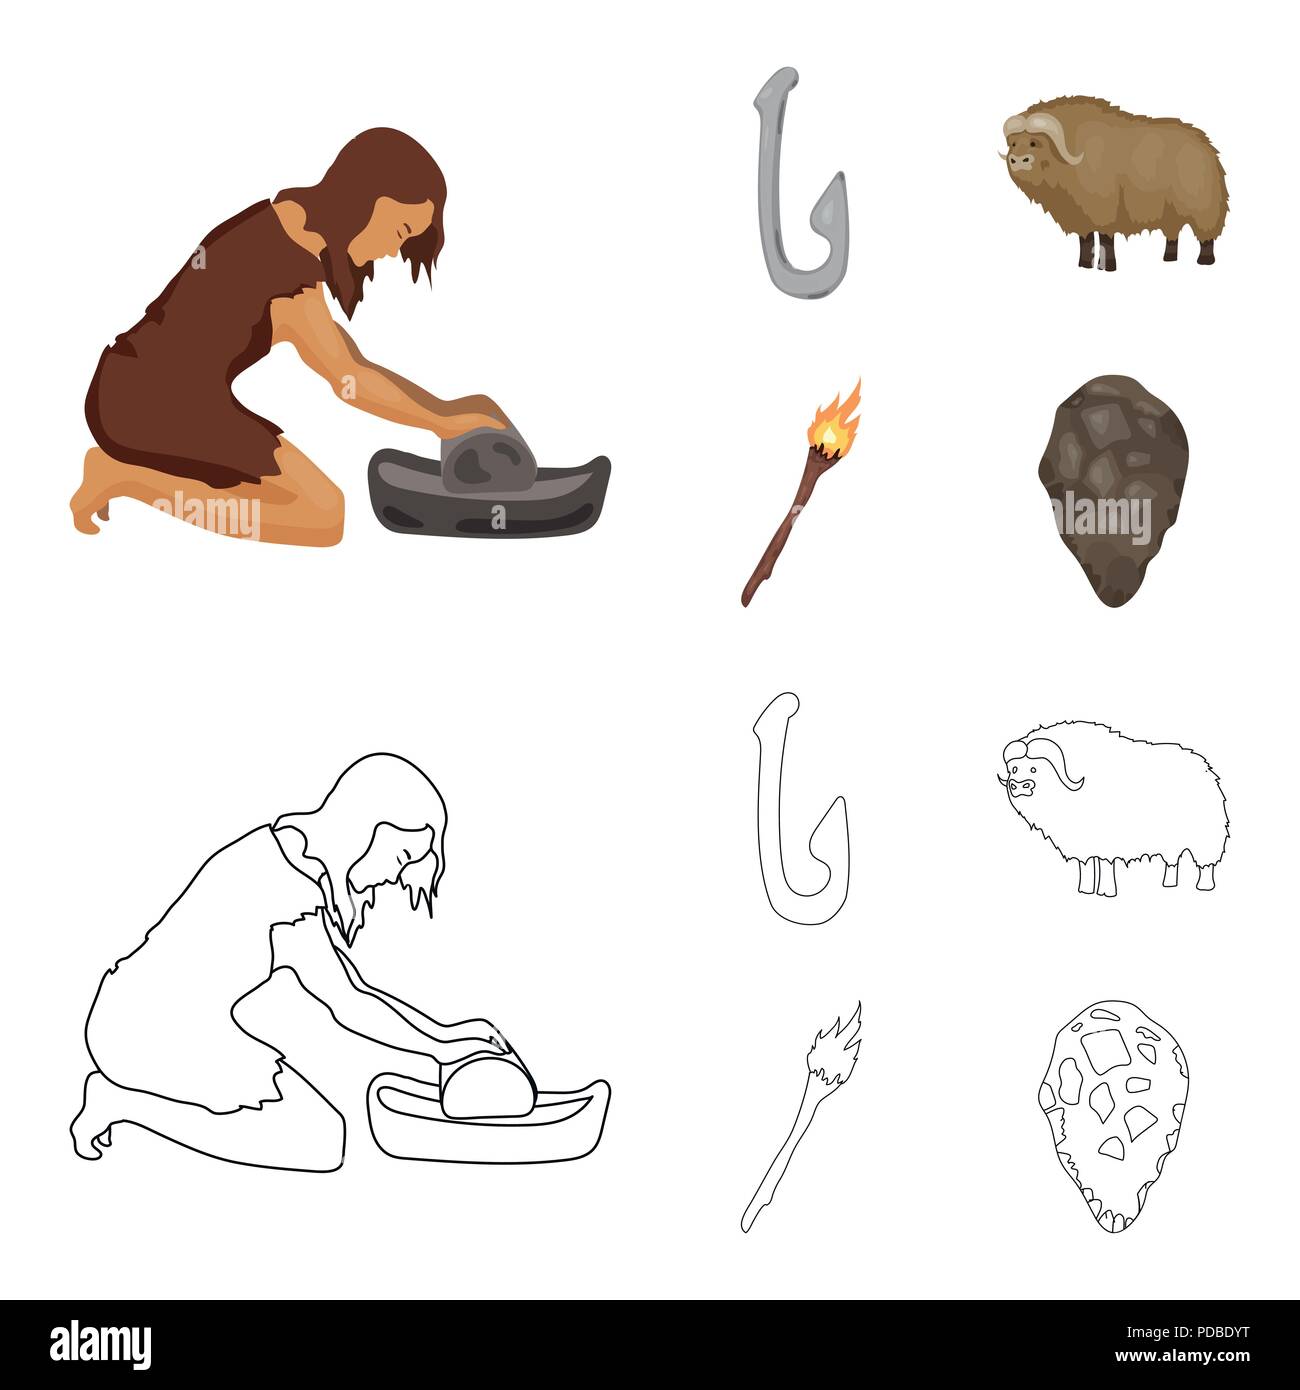 https://c8.alamy.com/comp/PDBDYT/cattle-catch-hook-fishing-stone-age-set-collection-icons-in-cartoonoutline-style-vector-symbol-stock-illustration-PDBDYT.jpg